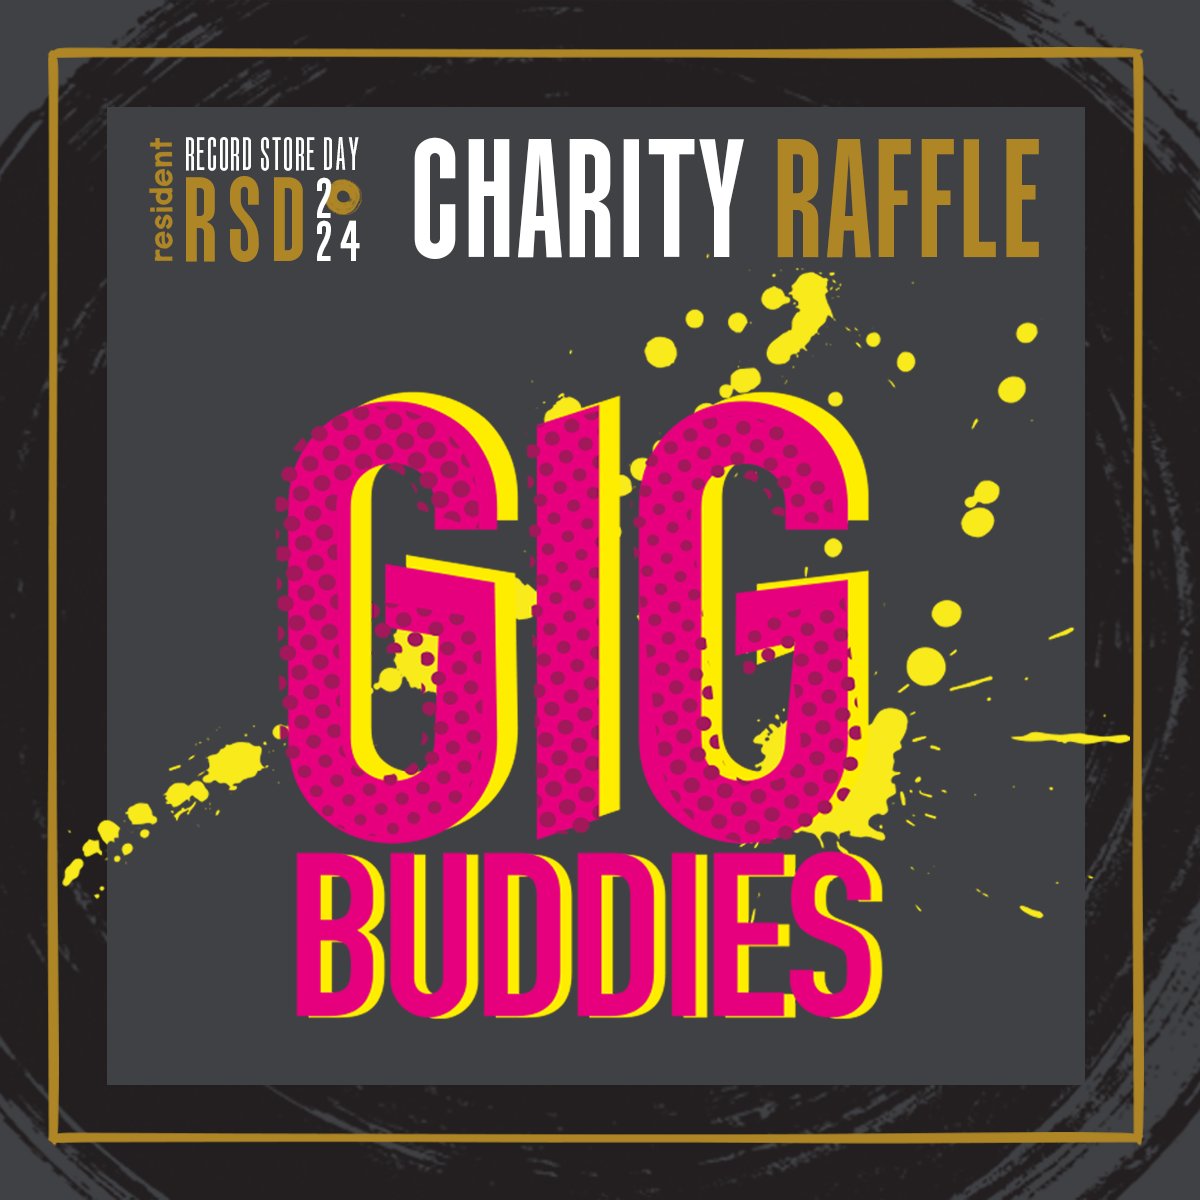 @RSDUK @RicherSounds @lovesupremefest @btnpsychfest @FaberBooks @chalkvenue @CommunionMusic @greendoorstore @formpresents @LasgoOfficial @heavenlyrecs All money raised from the raffle will go to @gigbuddies who do incredible work assisting people with disabilities in getting to see live music. Read more about Gig Buddies incredible work here: gigbuddies.org.uk. P.S. Don't forget, you'll need to be here in person at